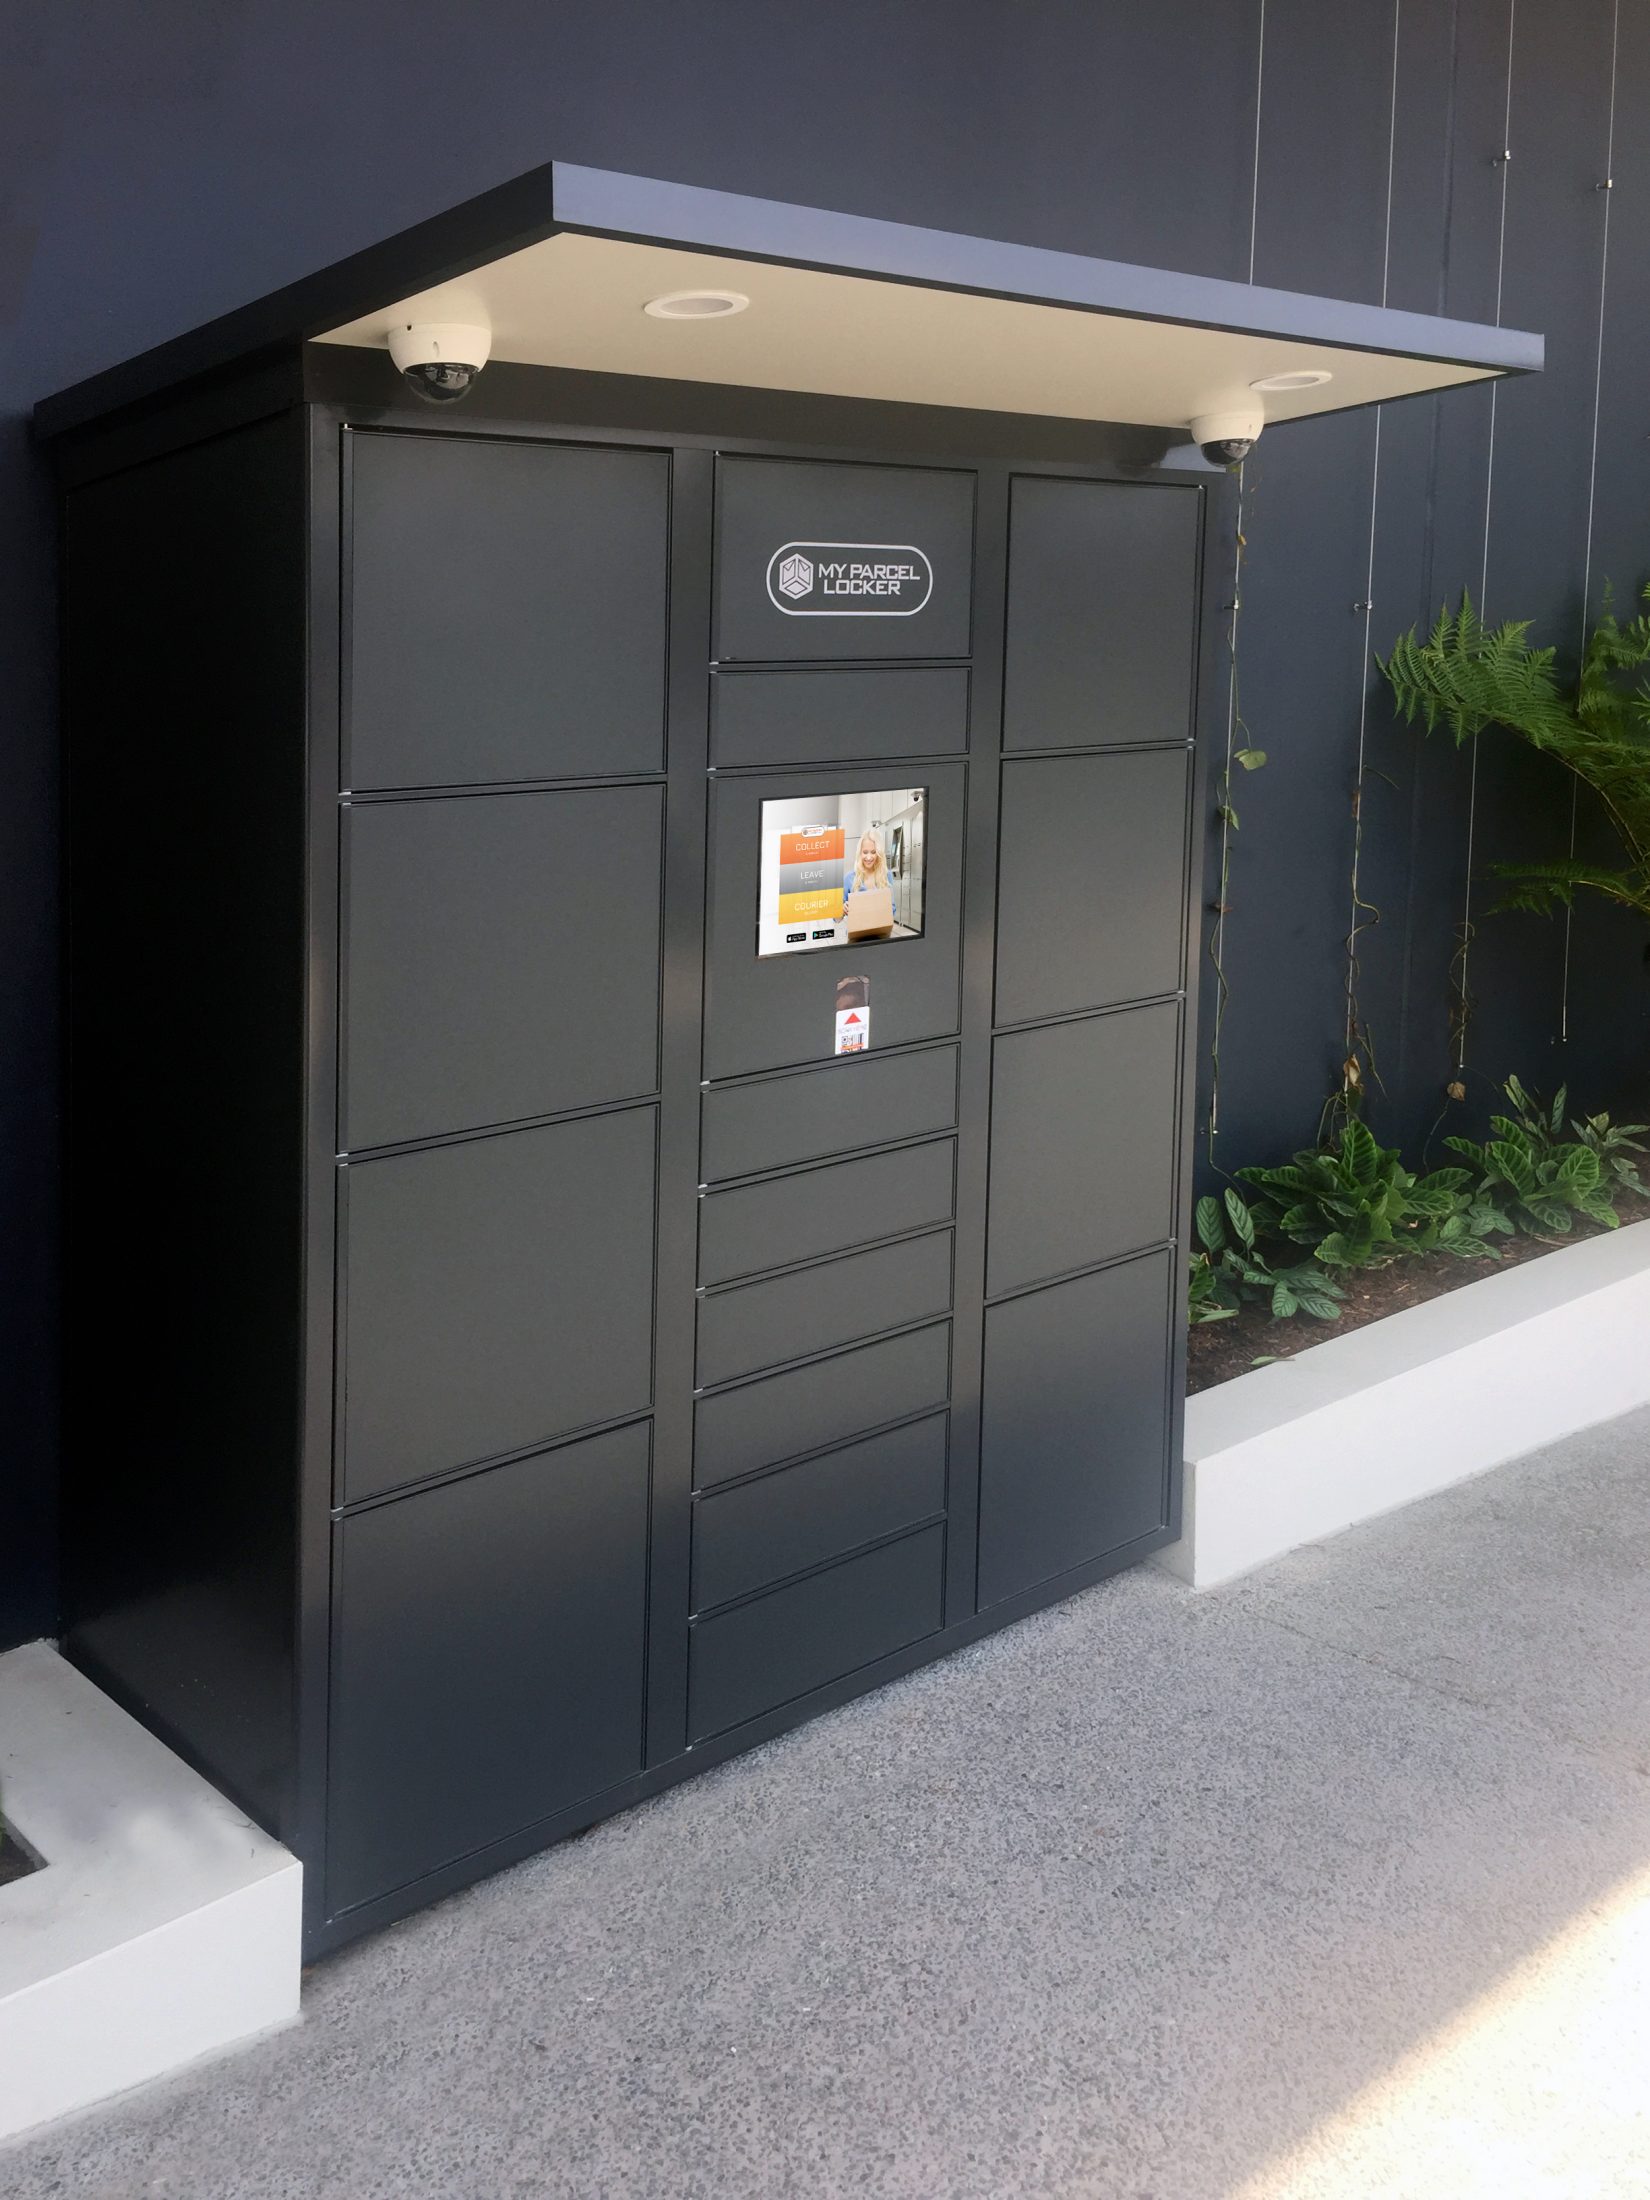 Parcel Lockers explained: How do they work?